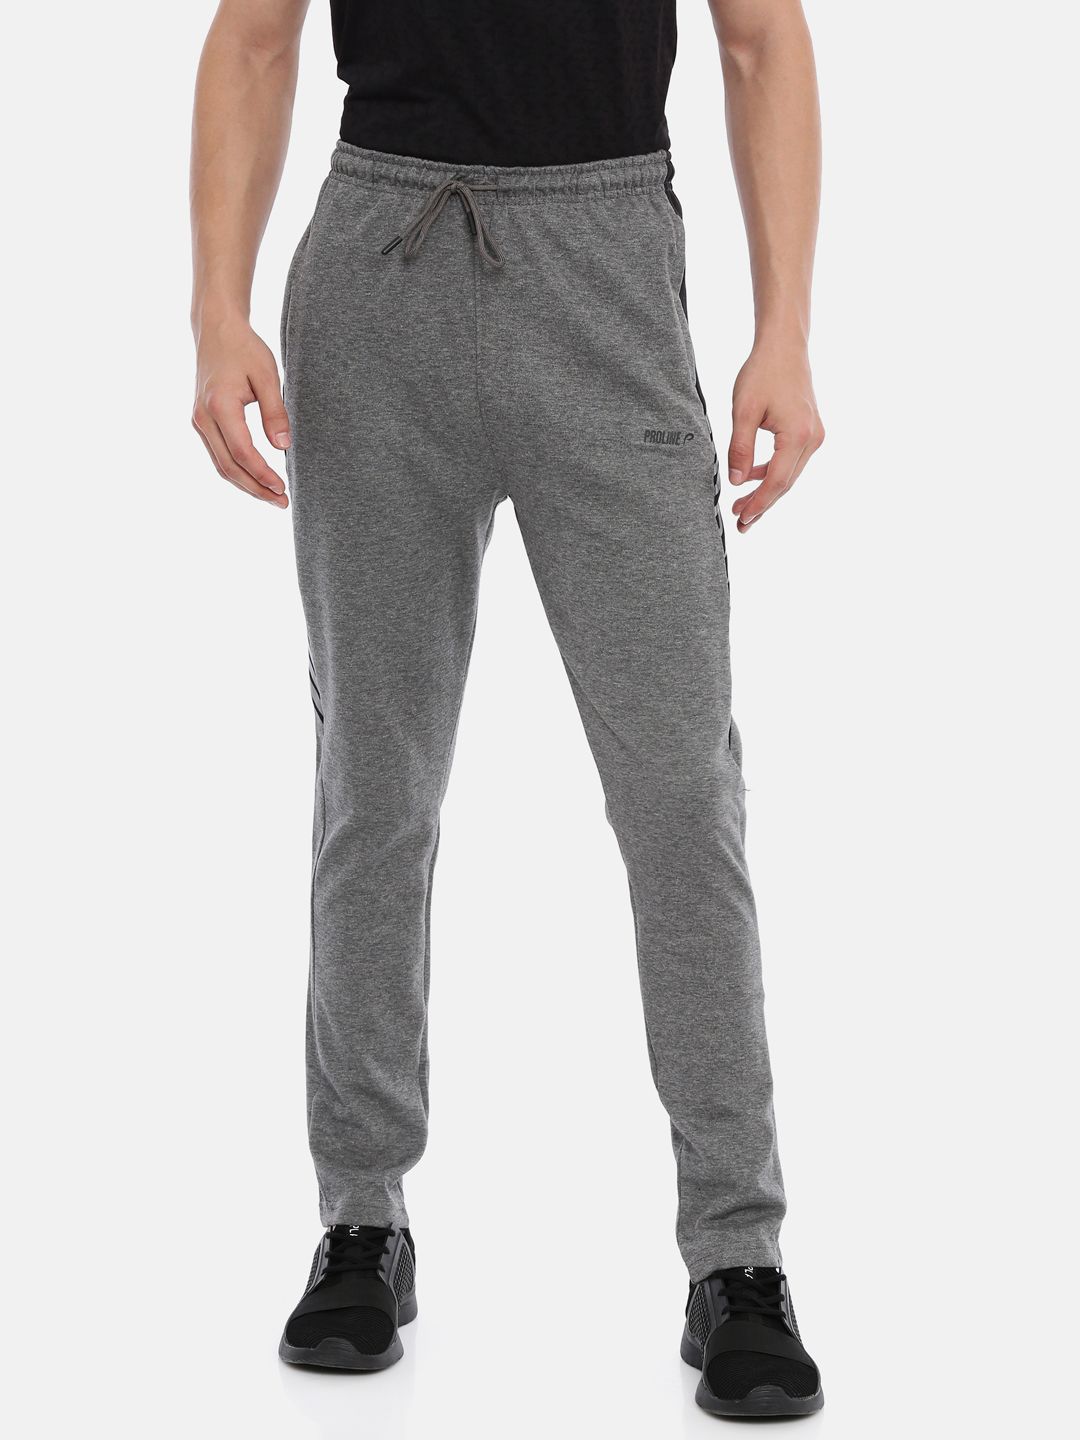 Buy Proline Active Proline Active Men Light Grey Solid Mid Rise Elasticated  Casual Track Pants at Redfynd